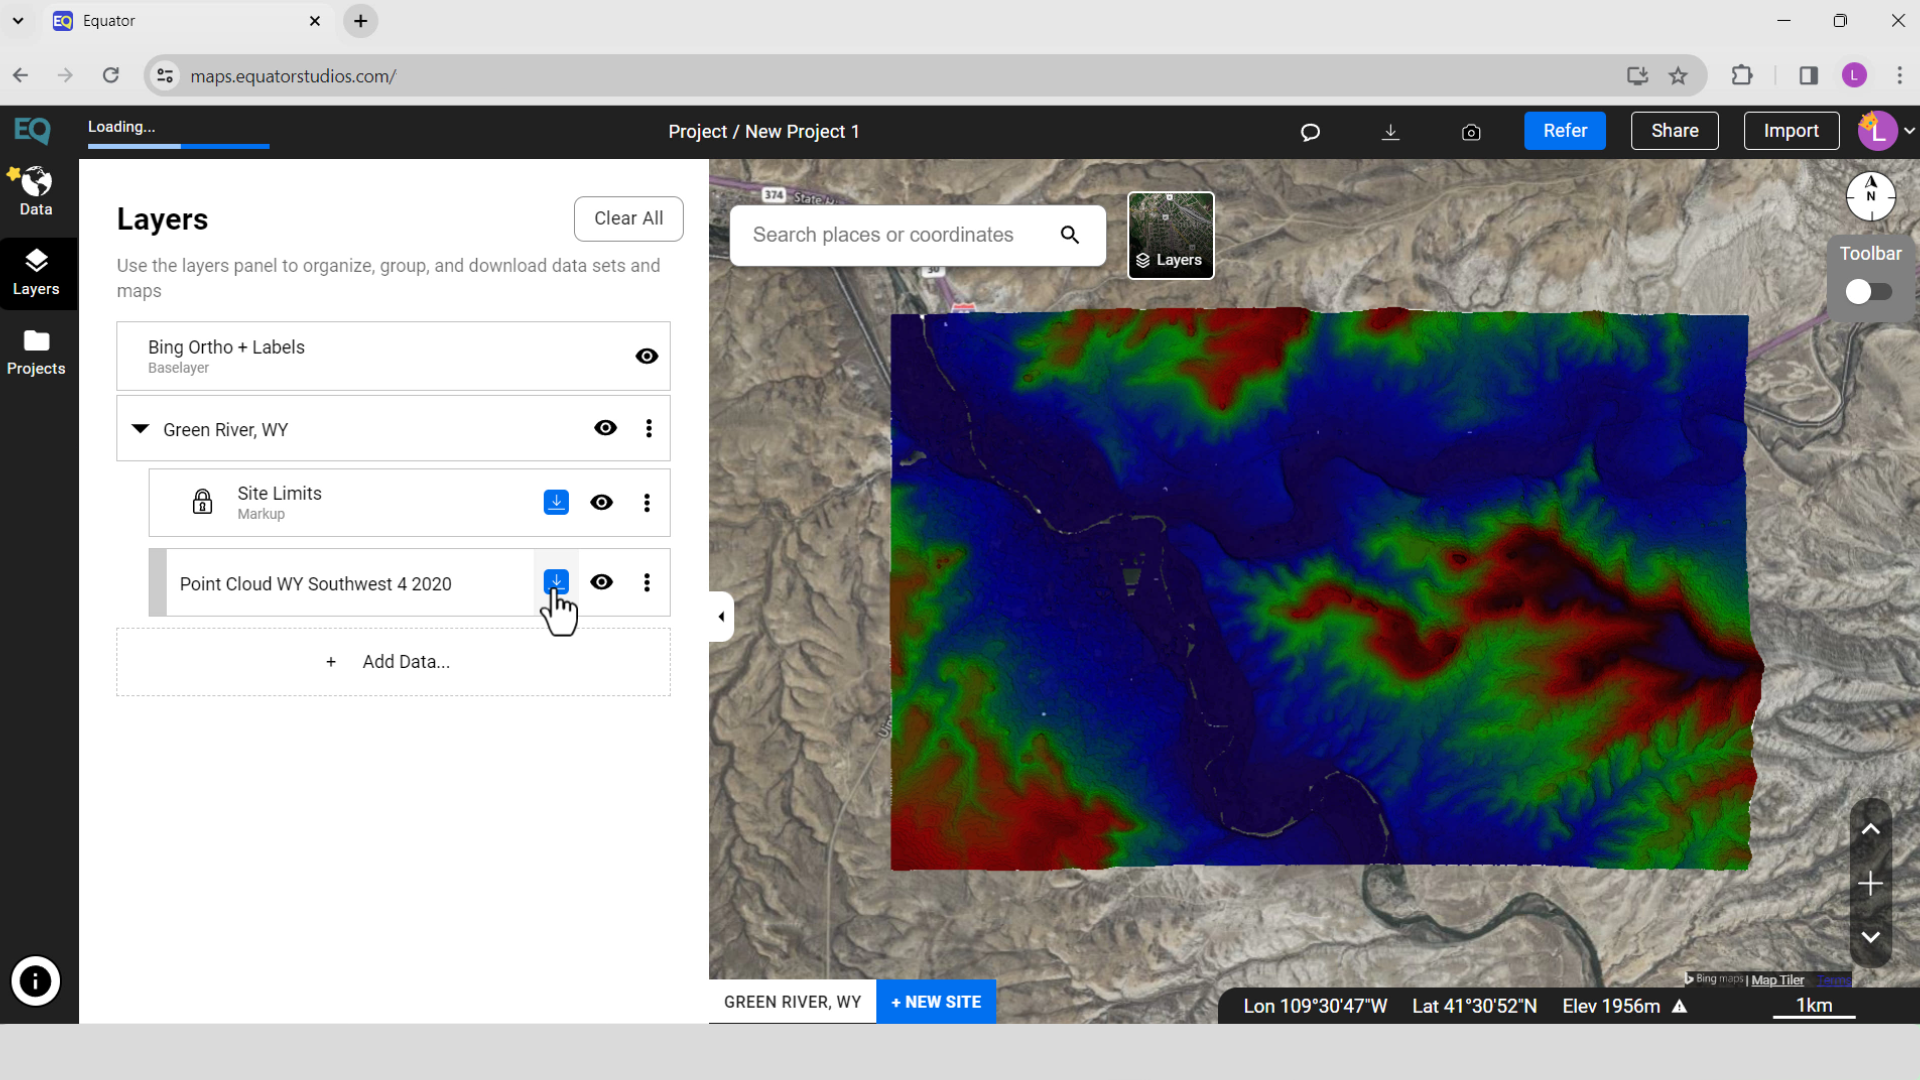 Create a Profile from LAS File in ArcGIS - Generate a Point Cloud (LAZ File) in Equator